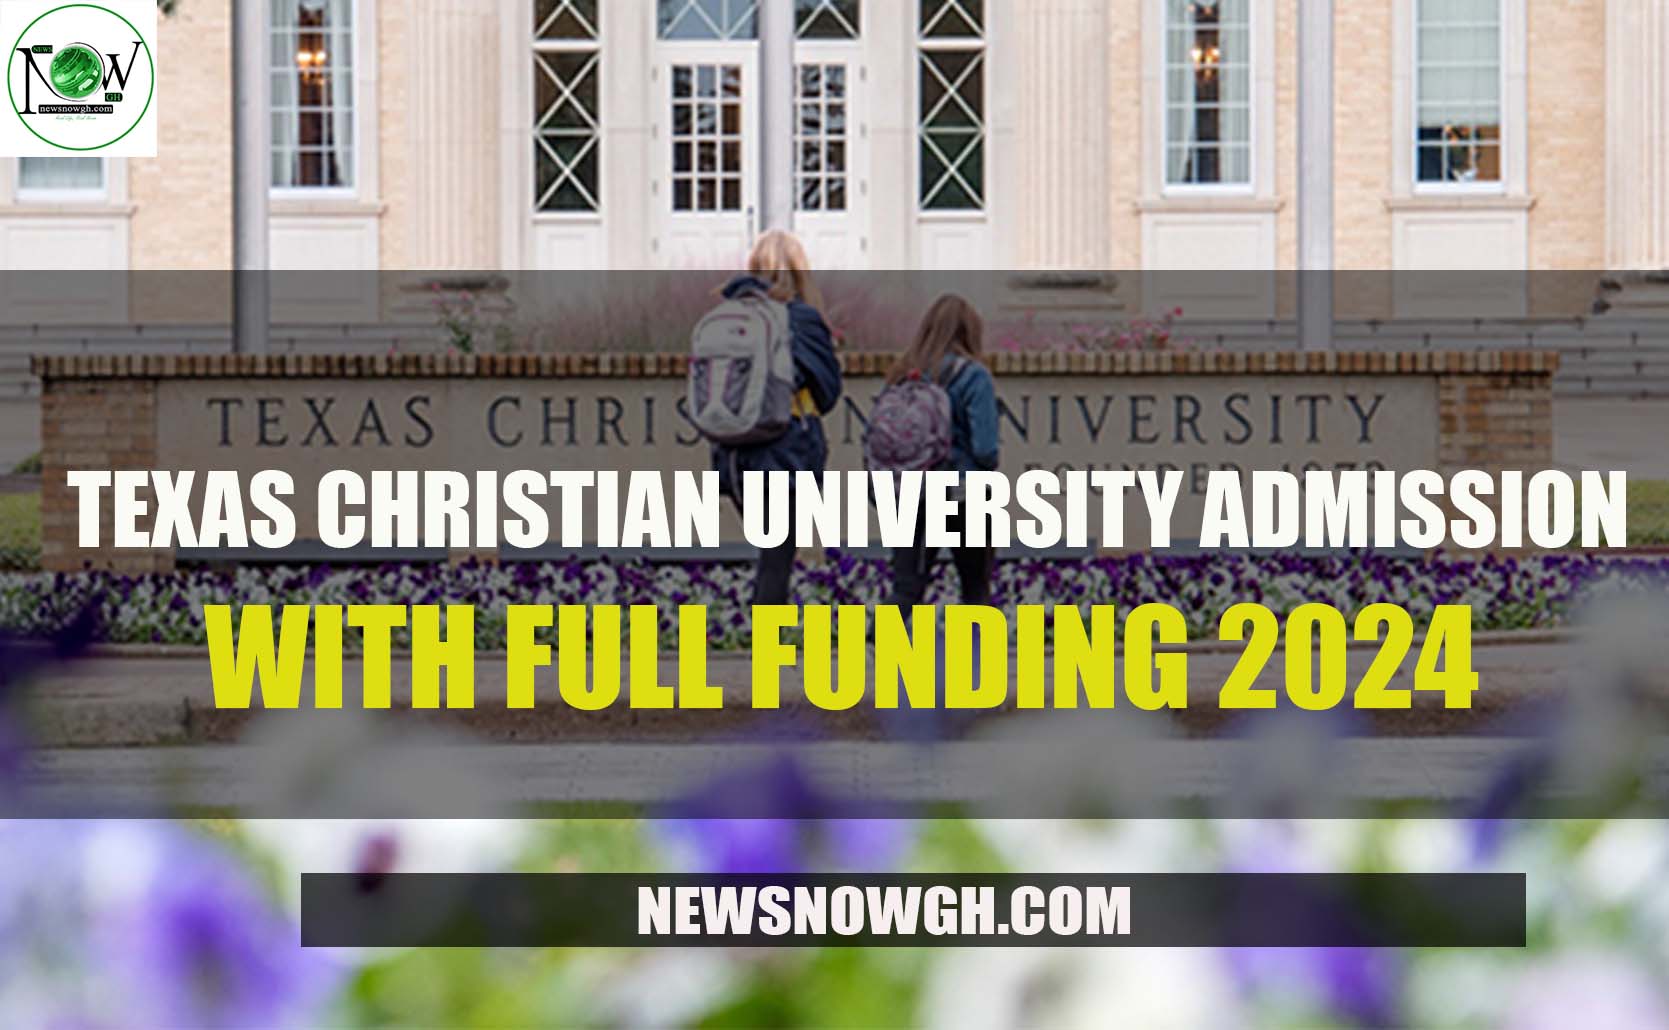 Texas Christian University admissions with full funding for 202425